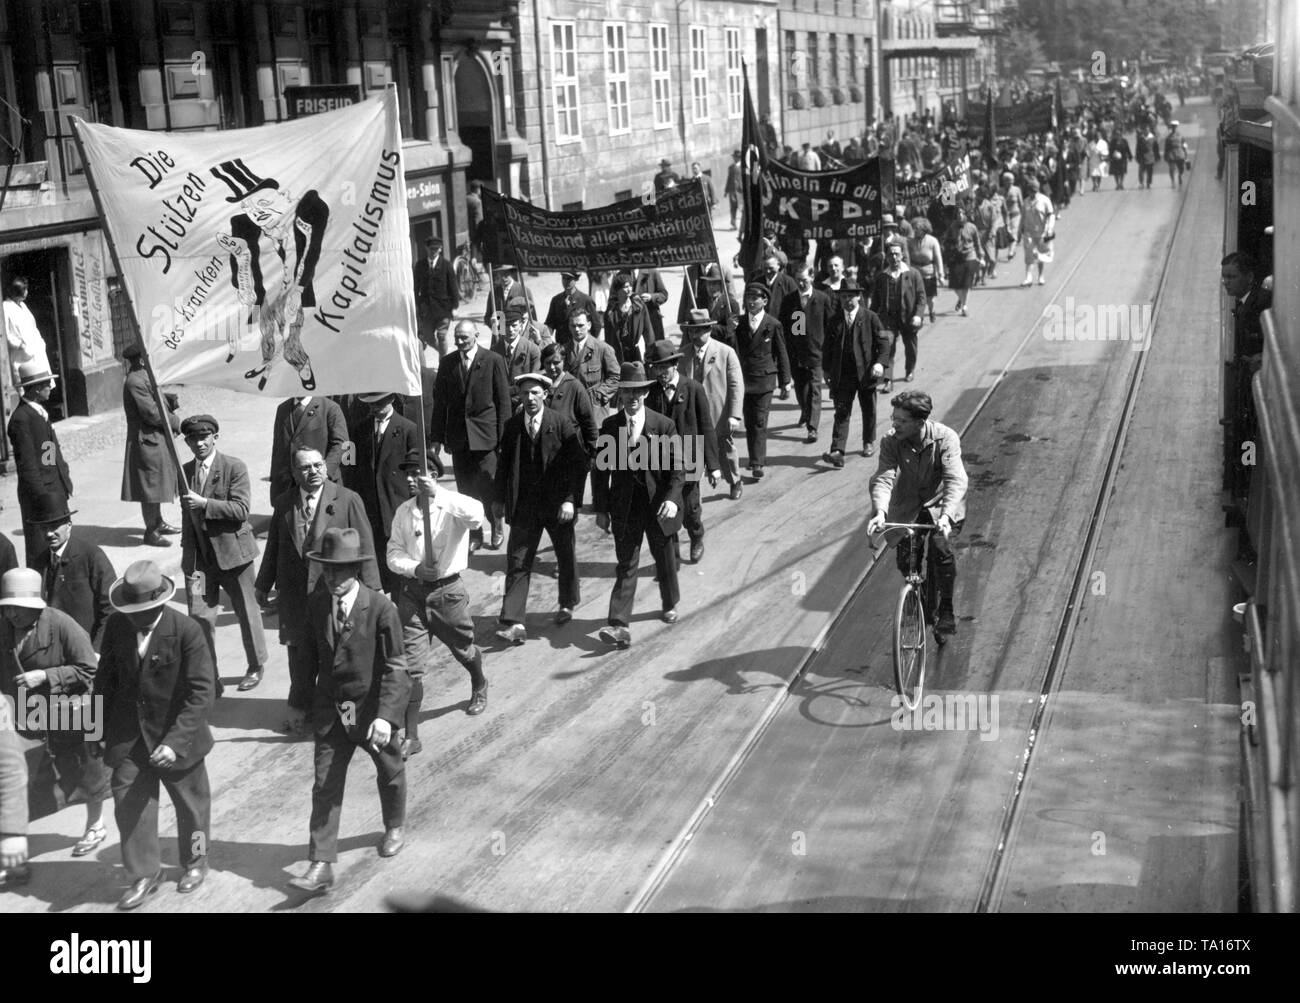 The demonstrators carry a banner on which the SPD is presented as a crutch for the collapsing capitalism. On another banner, the following can be read: 'The Soviet Union is the fatherland of all workers. Defend the Soviet Union'. Stock Photo